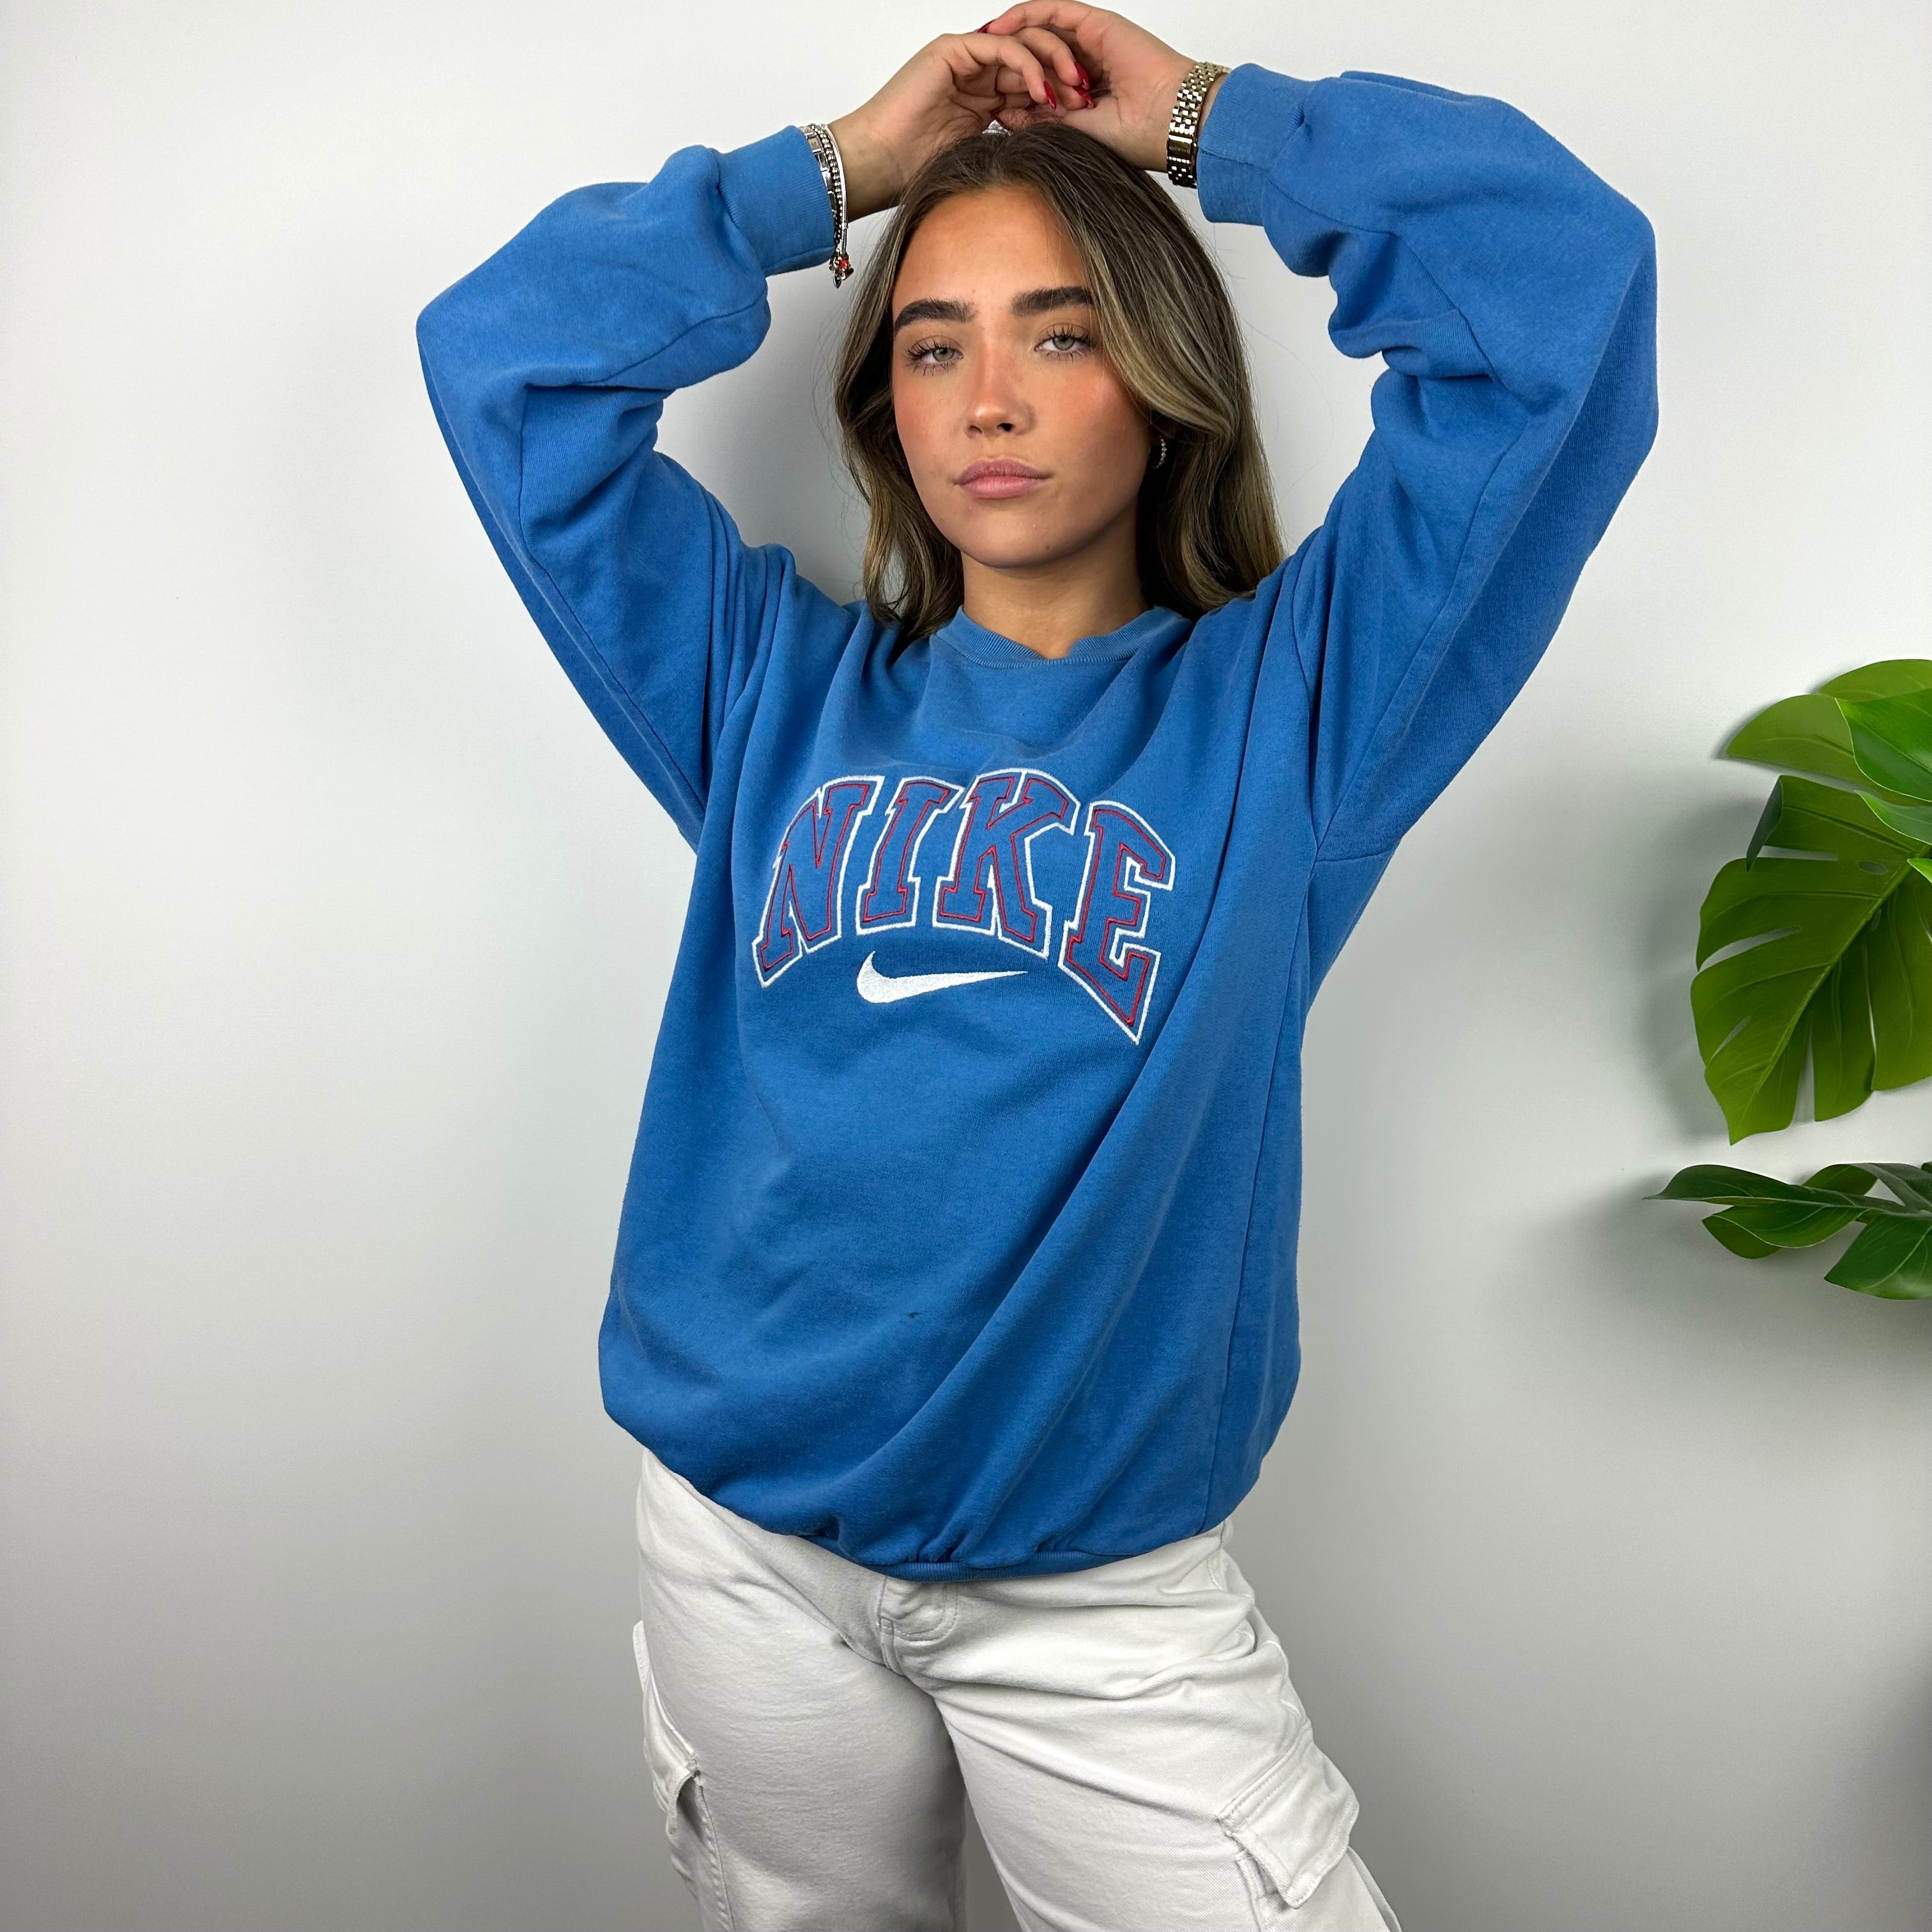 Nike Blue Embroidered Spell Out Sweatshirt (M)